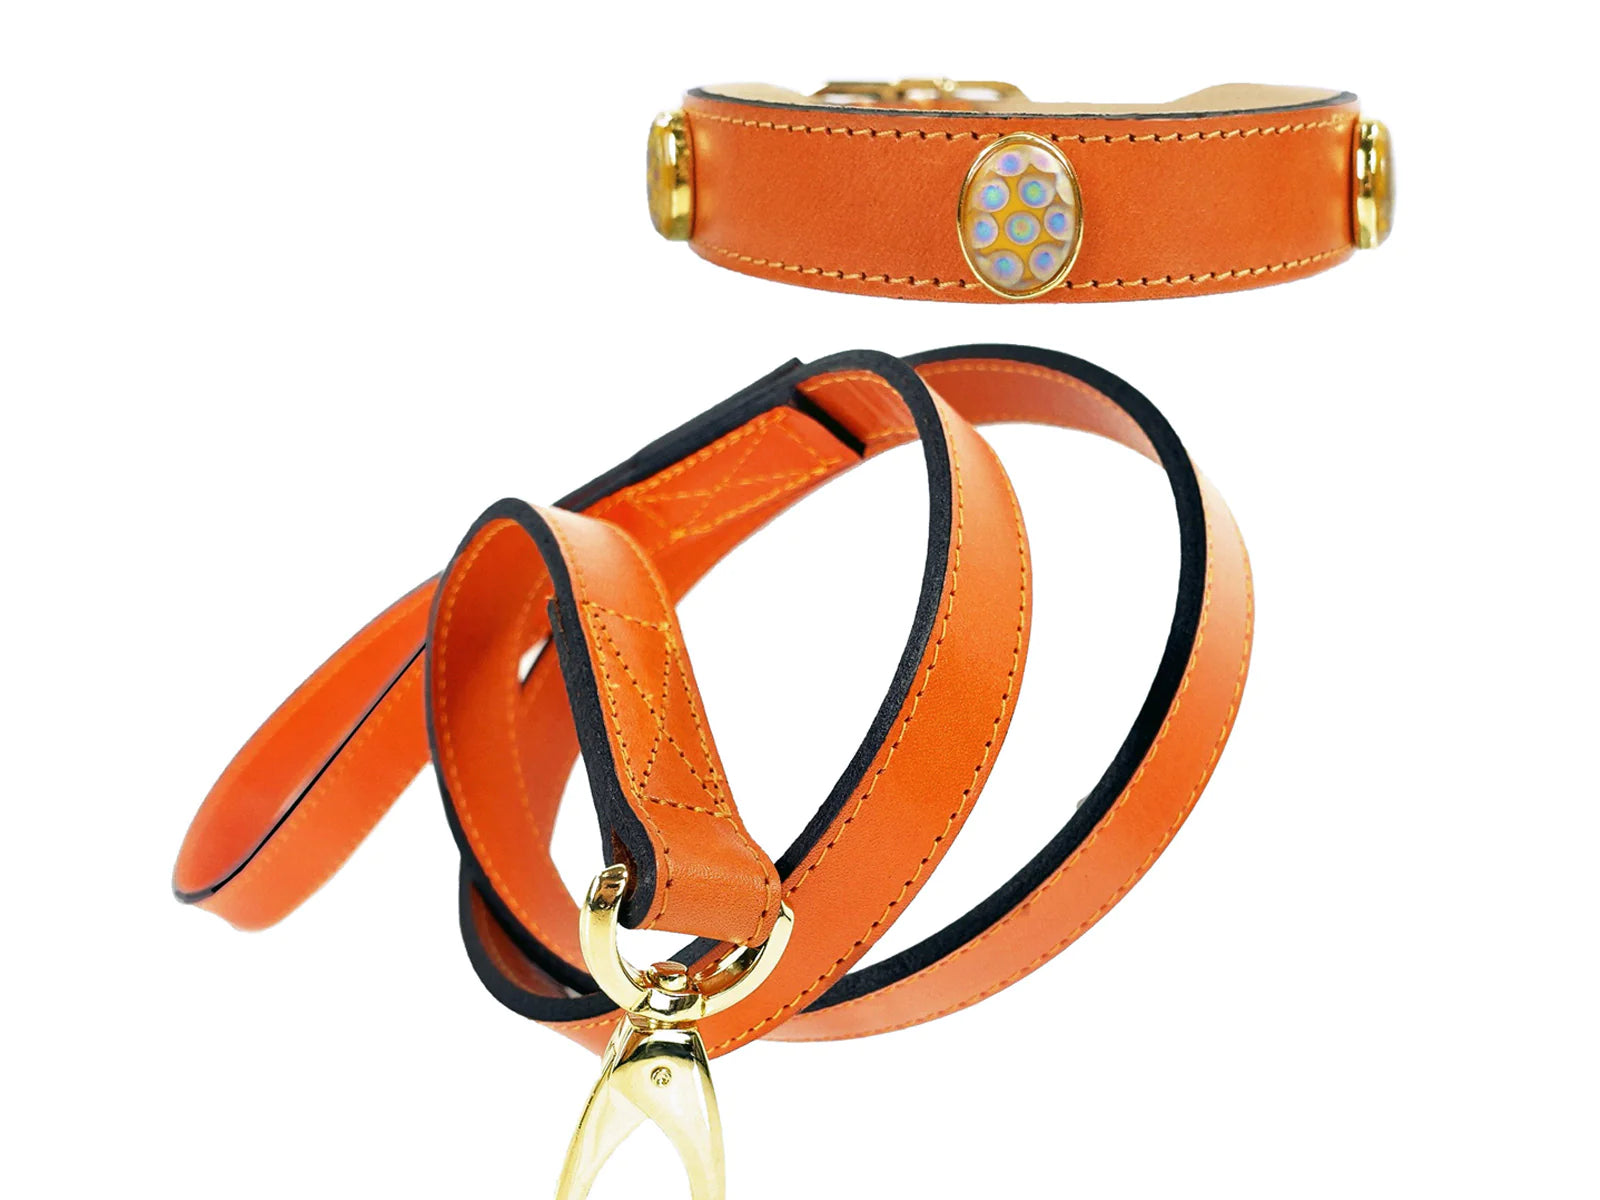 Peacock Luxury Dog Collar and Leash Collection